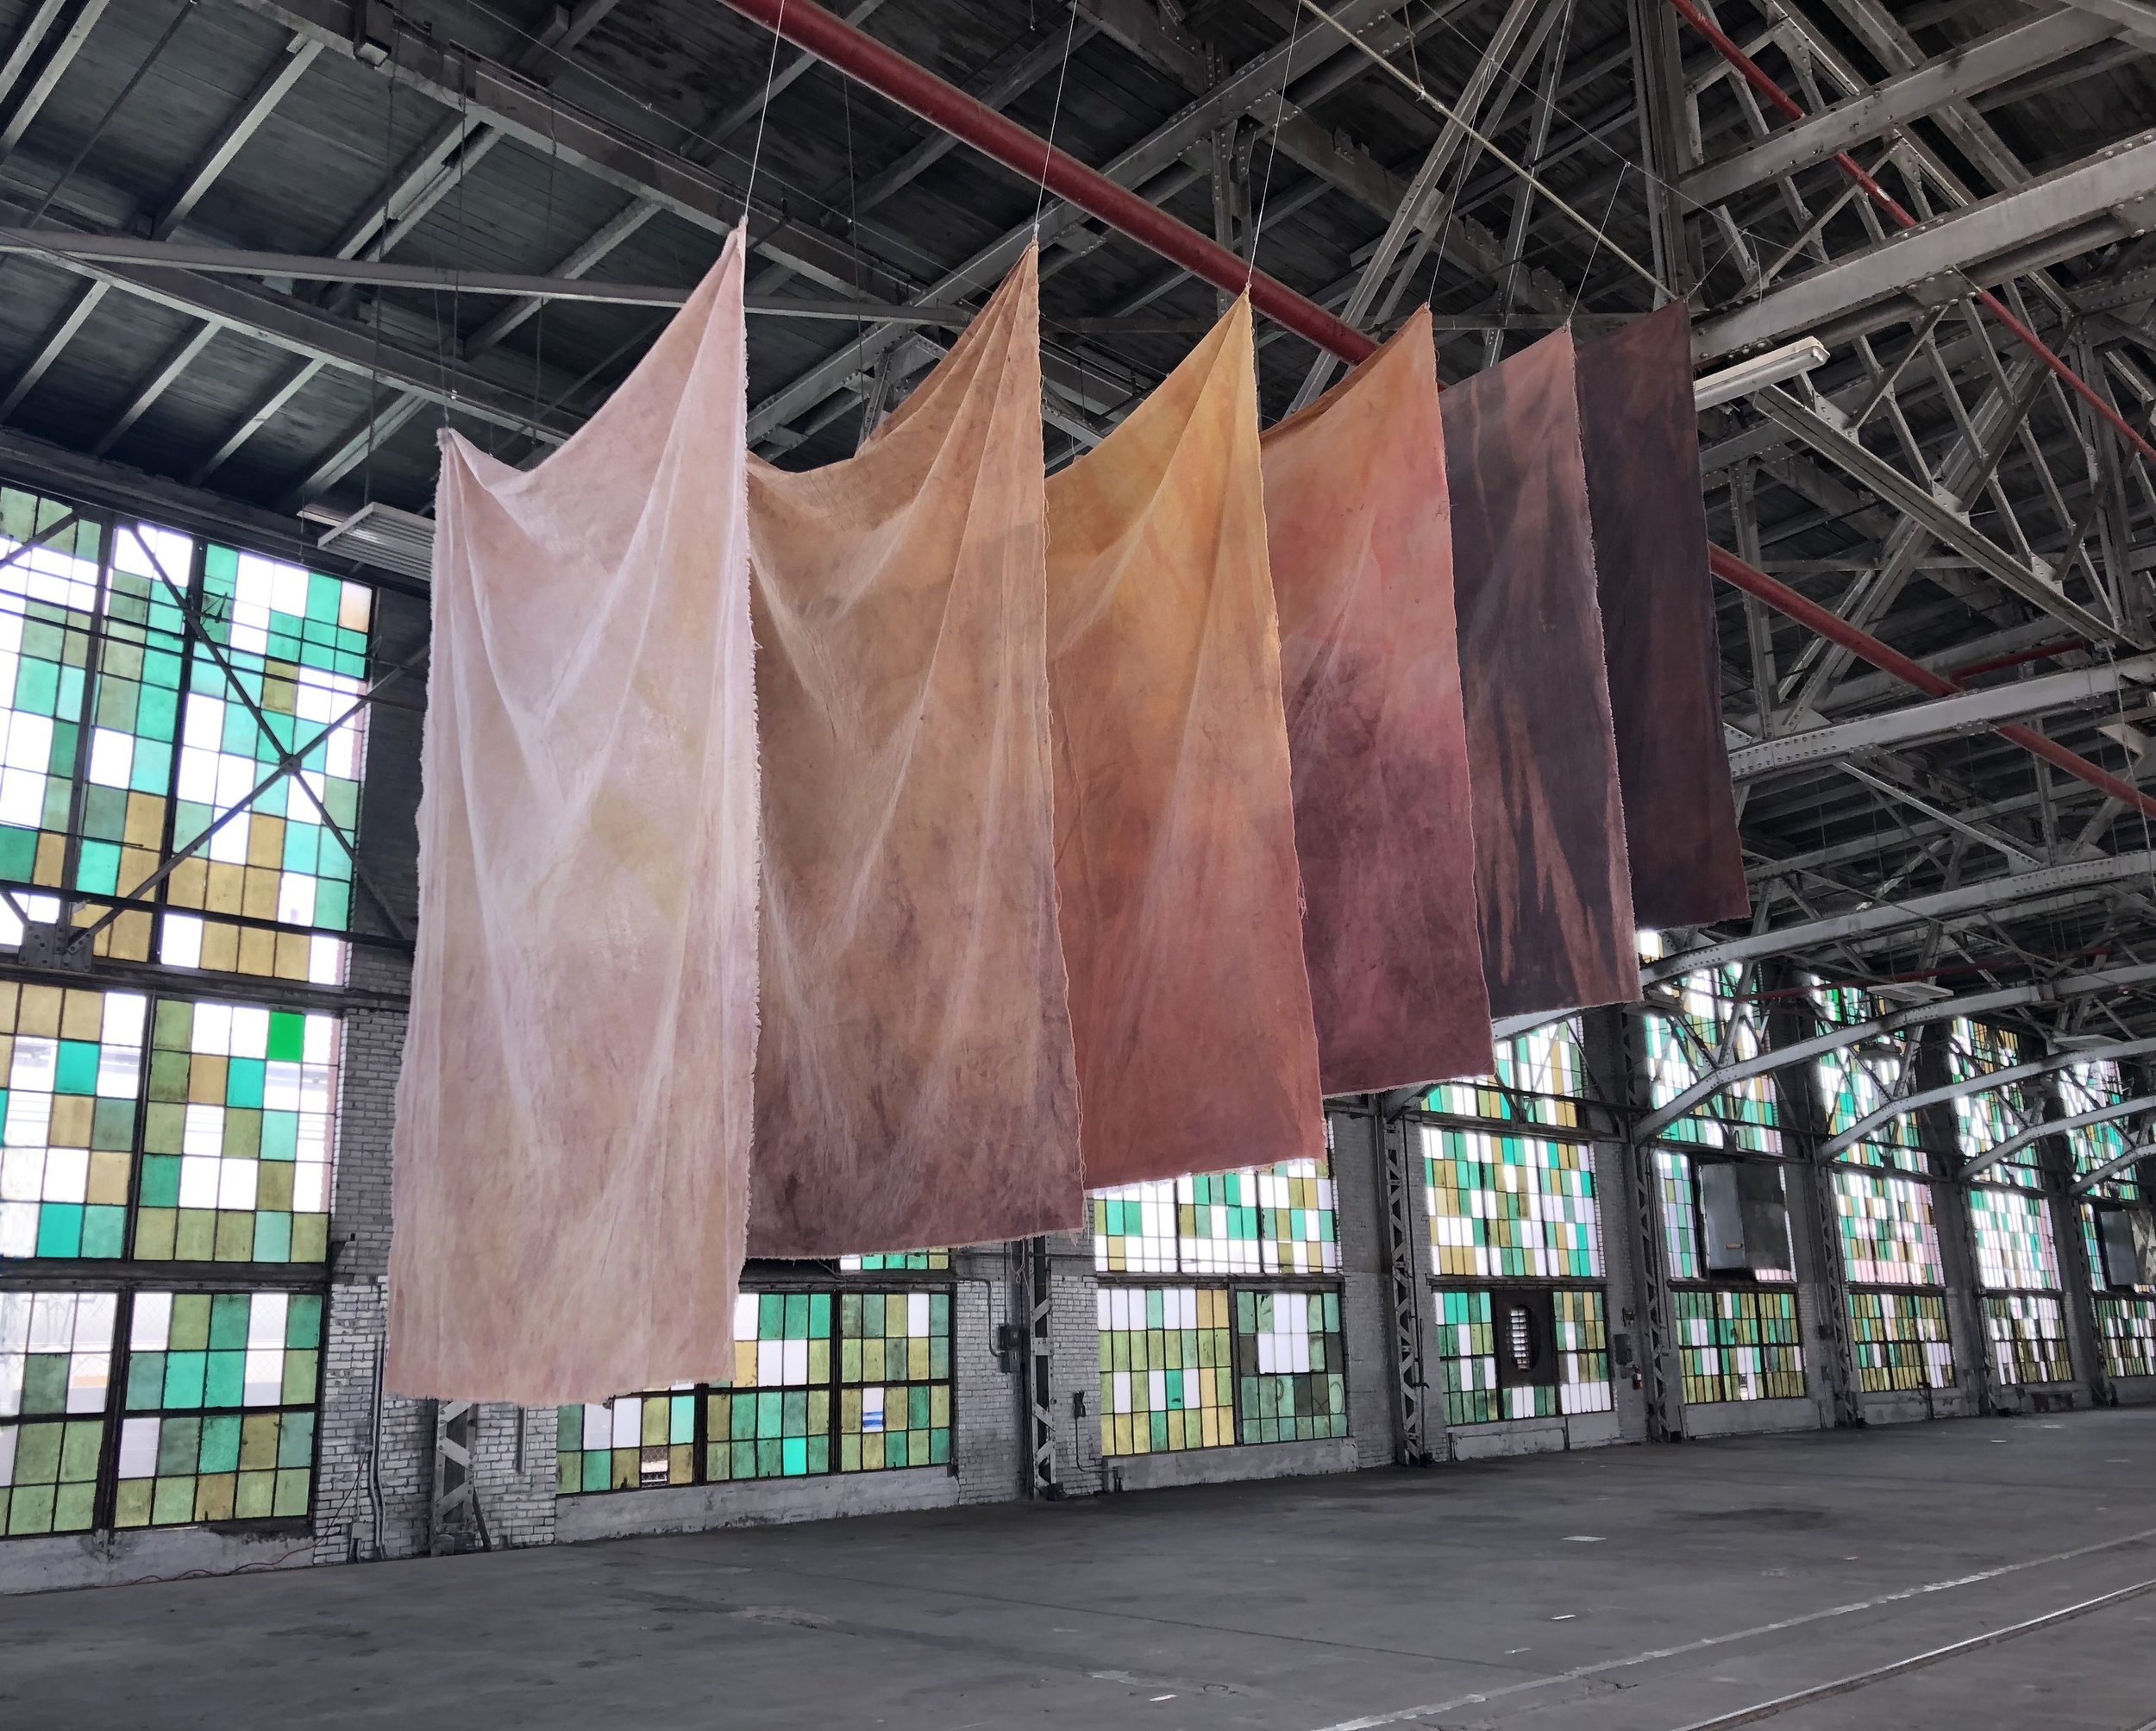  Hourseyes (Joni Tobin) and I made this installation for OneBeat’s international music event at Albuquerque Railyards, with 516 Arts, curated by Rachelle Pablo. Nov 2023 